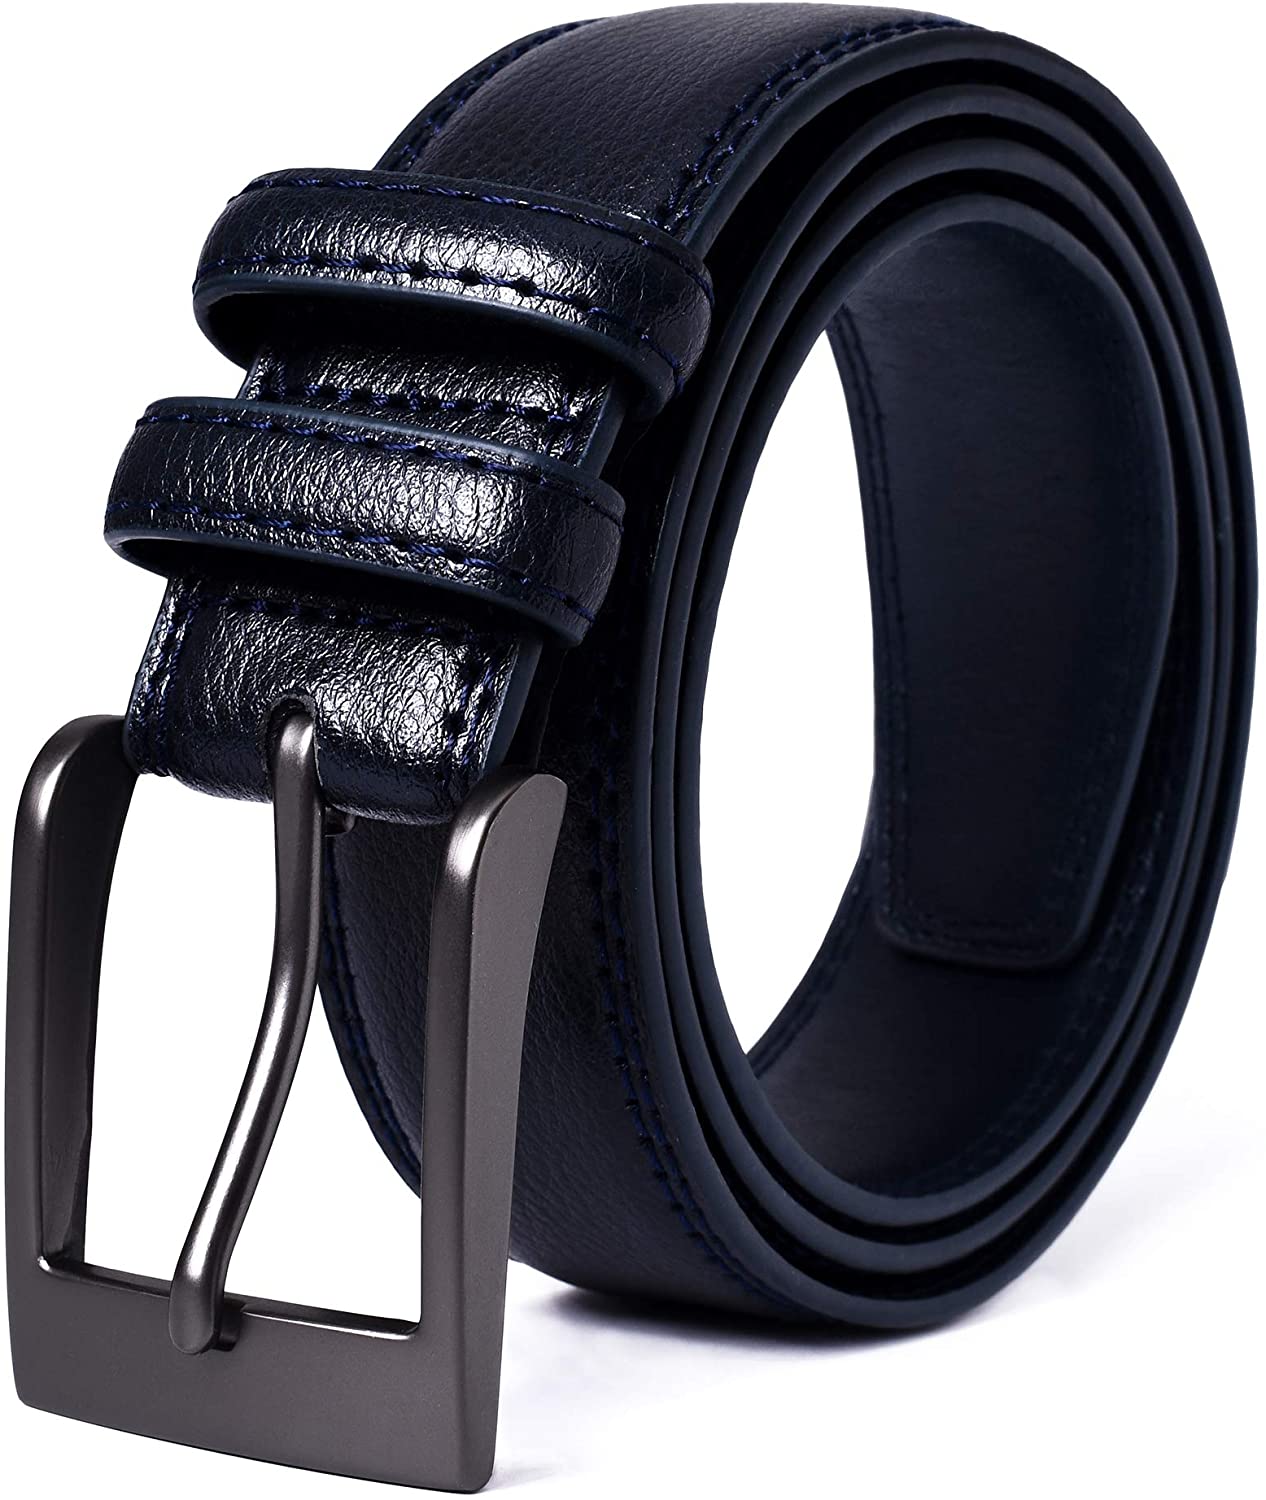 Buy Veteran Stretchable braided cotton belt for women, ladies belt,  Black,and Grey, color Combo of 2 pcs(Stretch Belt-06) at